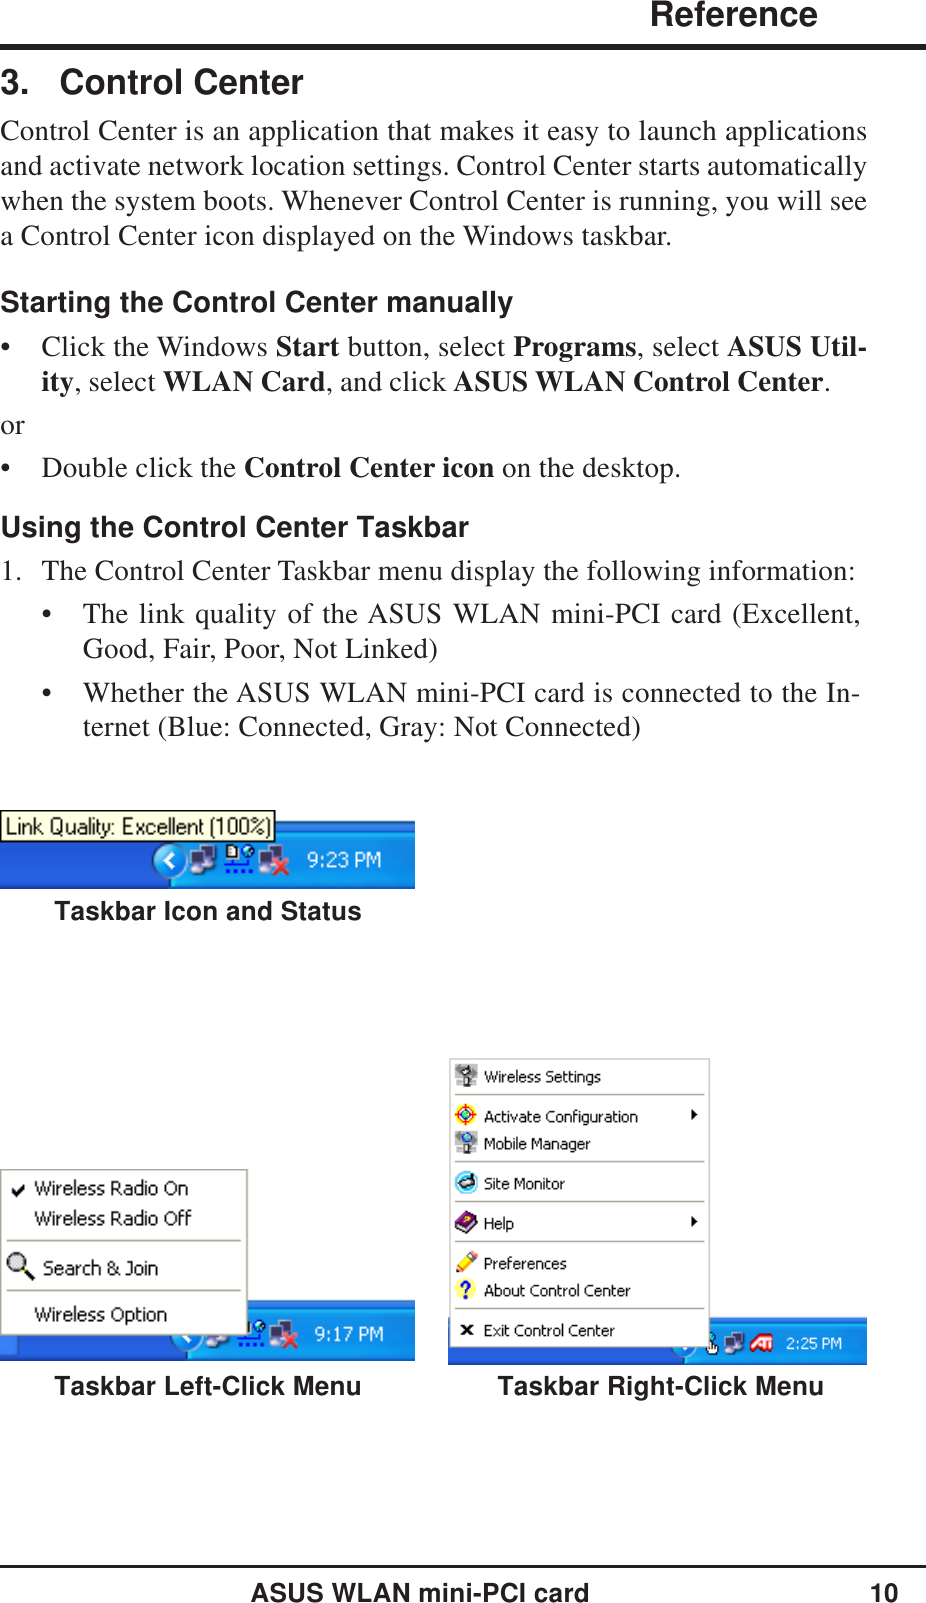 ASUS WLAN mini-PCI card 10                   ReferenceChapter 33. Control CenterControl Center is an application that makes it easy to launch applicationsand activate network location settings. Control Center starts automaticallywhen the system boots. Whenever Control Center is running, you will seea Control Center icon displayed on the Windows taskbar.Starting the Control Center manually• Click the Windows Start button, select Programs, select ASUS Util-ity, select WLAN Card, and click ASUS WLAN Control Center.or• Double click the Control Center icon on the desktop.Using the Control Center Taskbar1. The Control Center Taskbar menu display the following information:• The link quality of the ASUS WLAN mini-PCI card (Excellent,Good, Fair, Poor, Not Linked)• Whether the ASUS WLAN mini-PCI card is connected to the In-ternet (Blue: Connected, Gray: Not Connected)Taskbar Right-Click MenuTaskbar Icon and StatusTaskbar Left-Click Menu